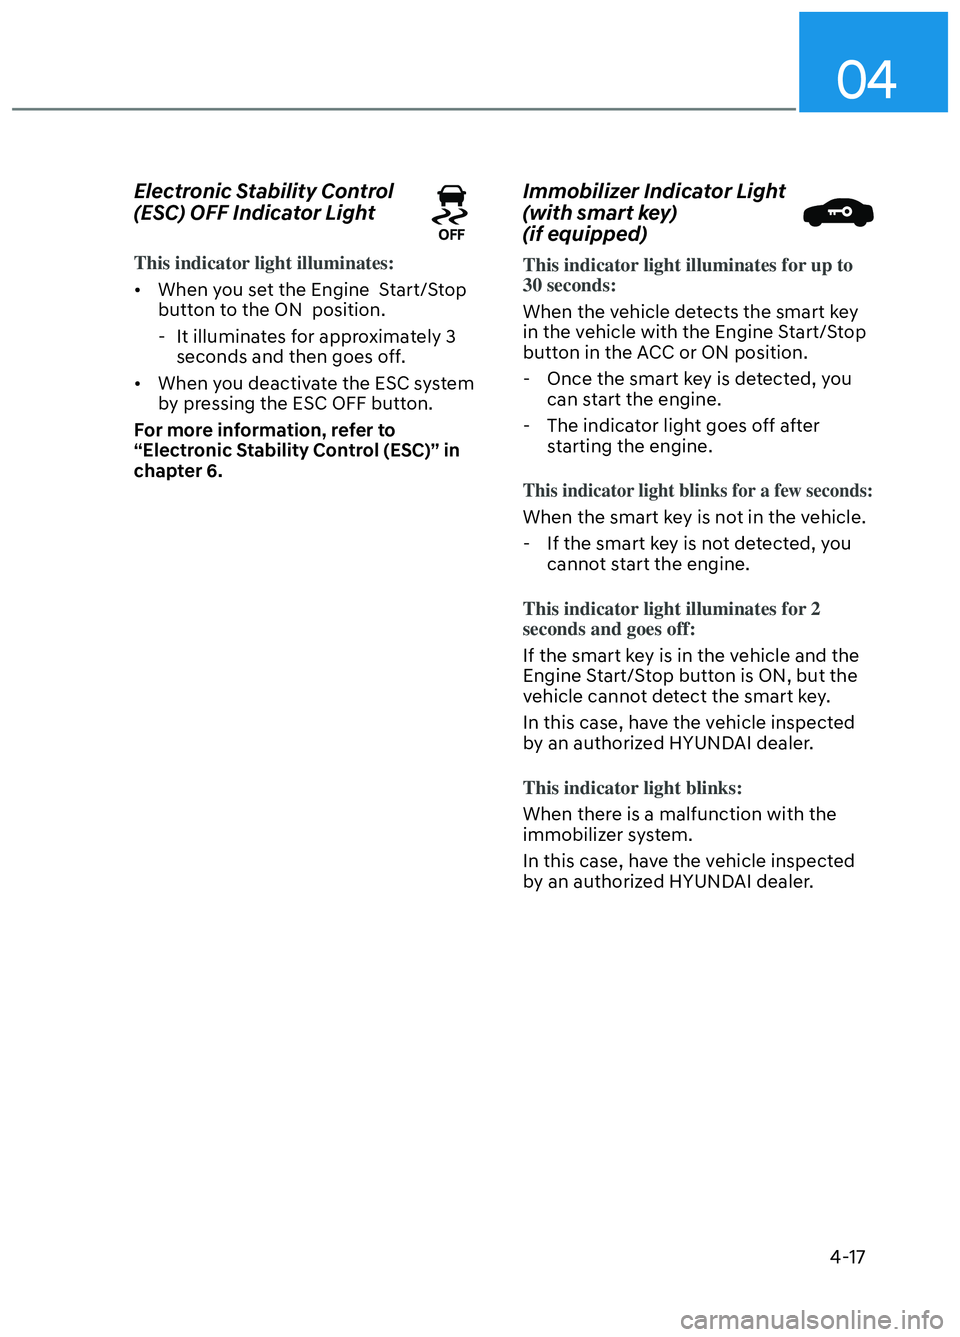 HYUNDAI ELANTRA N 2022  Owners Manual 04
4-17
Electronic Stability Control 
(ESC) OFF Indicator Light
This indicator light illuminates:
•  When you set the Engine  Start/Stop butt
 on to the ON  position.
 - It illuminates for approxima